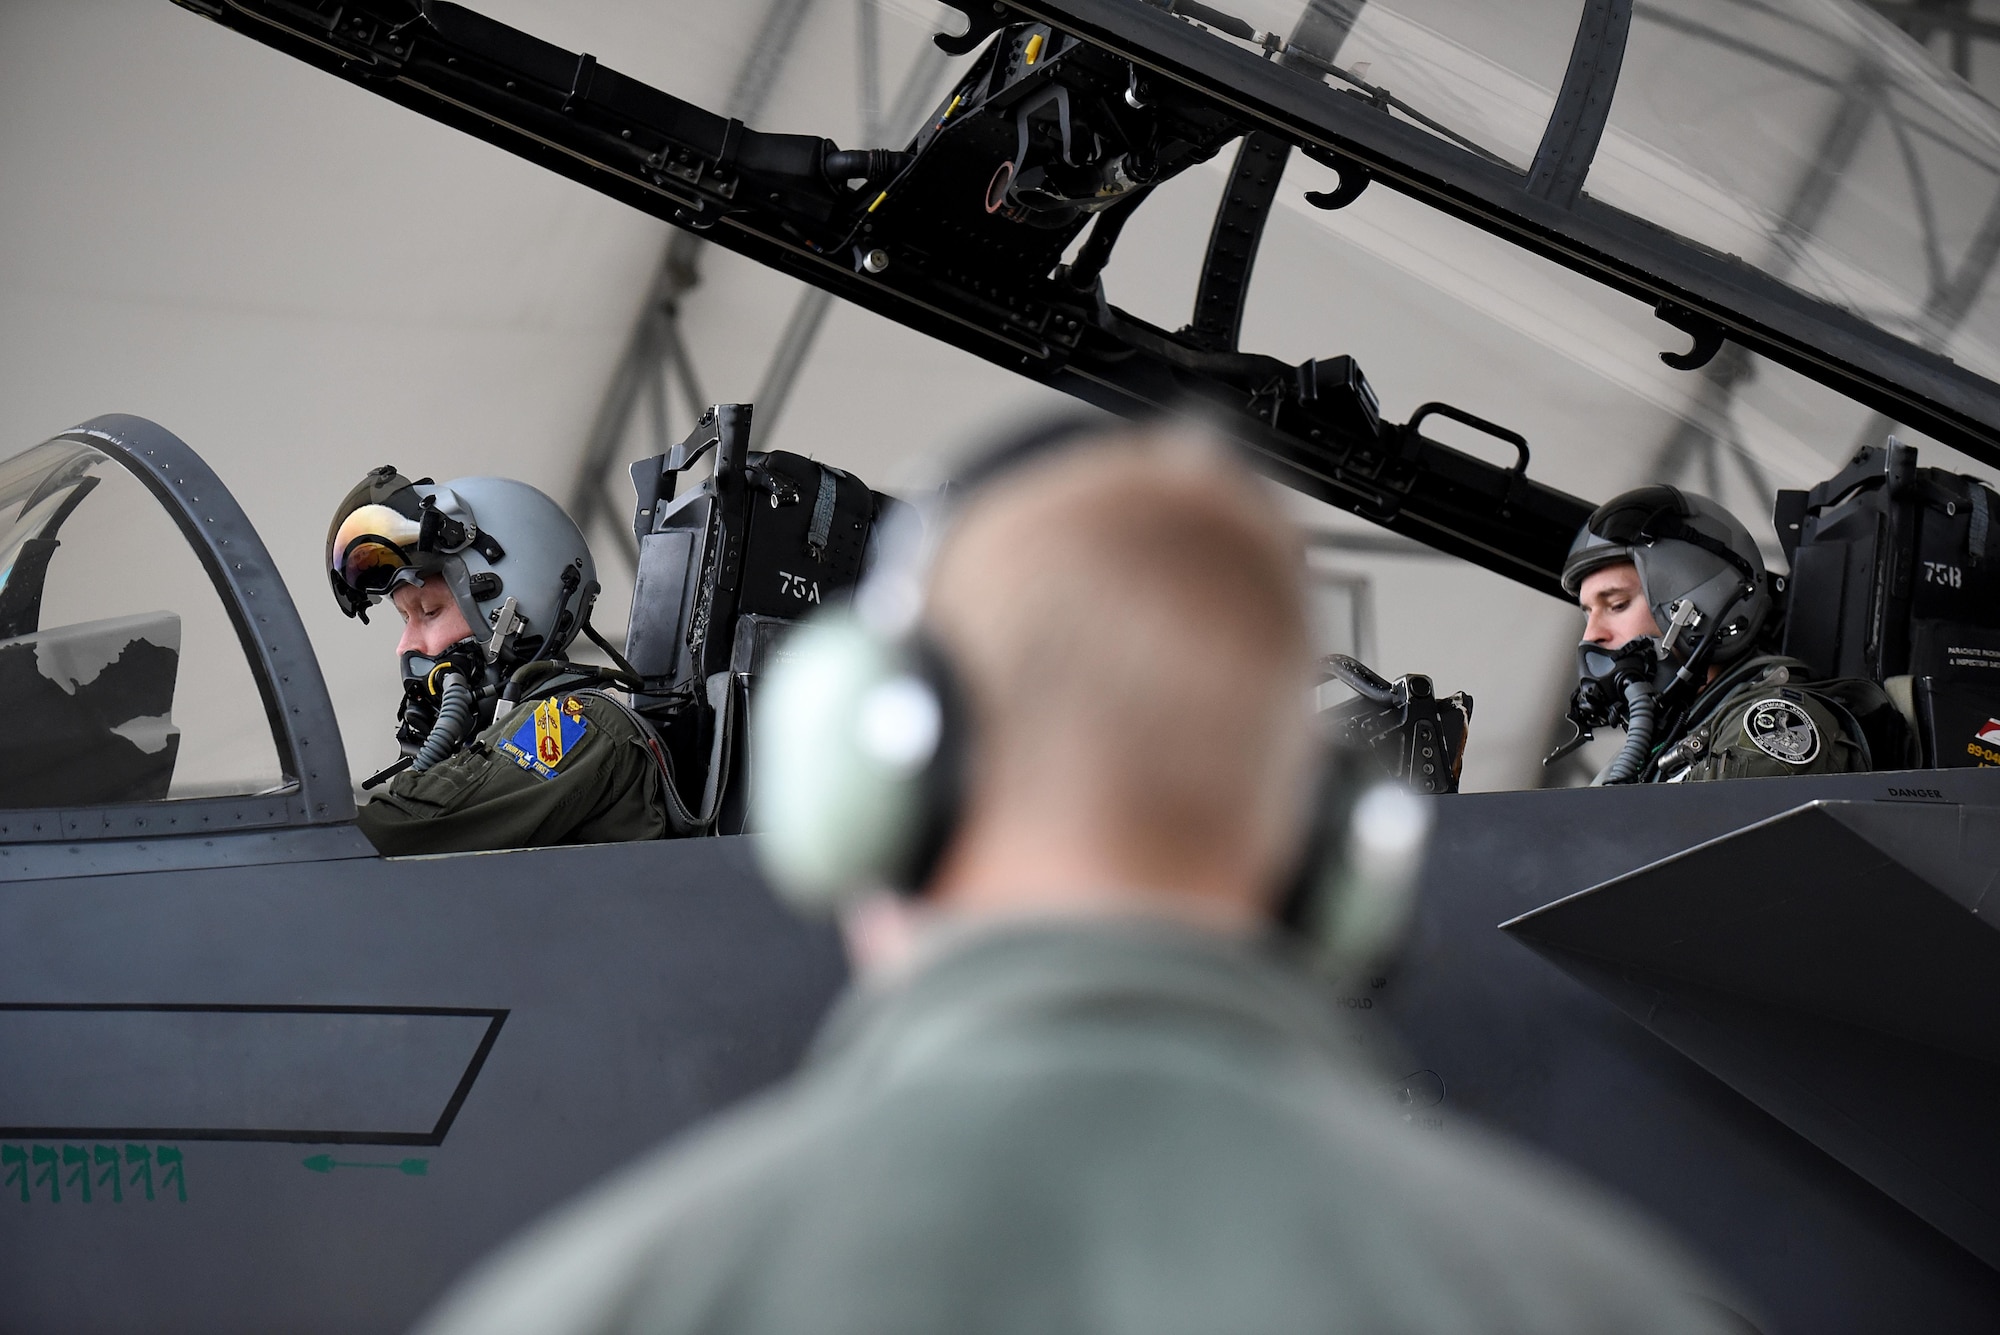 Col. Christopher Sage (left), 4th Fighter Wing commander, and Capt. Michael Piazza (right), 335th Fighter Squadron weapons system officer, prepare for takeoff during Razor Talon, Jan. 20, 2017, at Seymour Johnson Air Force Base, North Carolina. This is the first time Sage is participating in Razor Talon which combines sea, land and air units from all service branches in a realistic training environment. (U.S. Air Force photo by Airman 1st Class Kenneth Boyton)